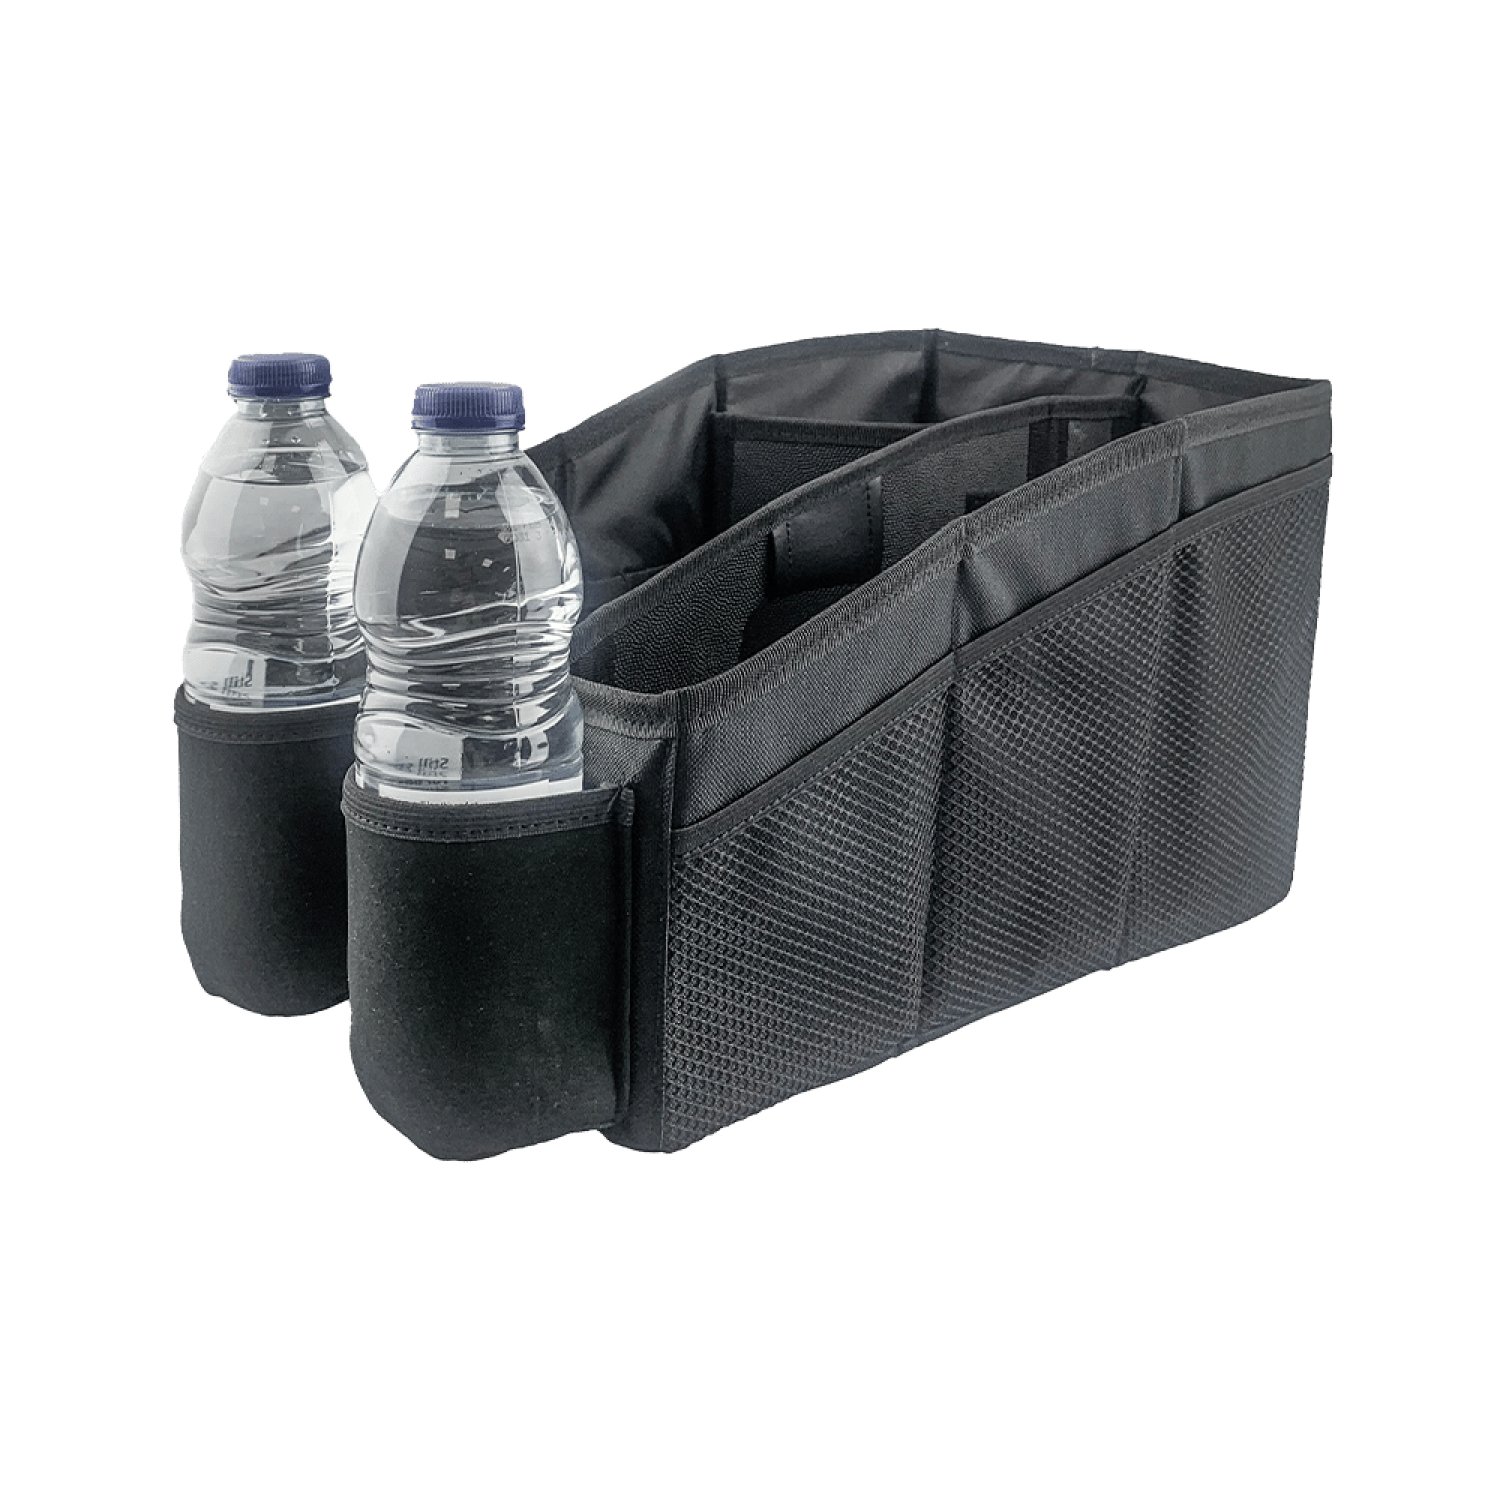 Simply Car Front and Back Seat Organiser